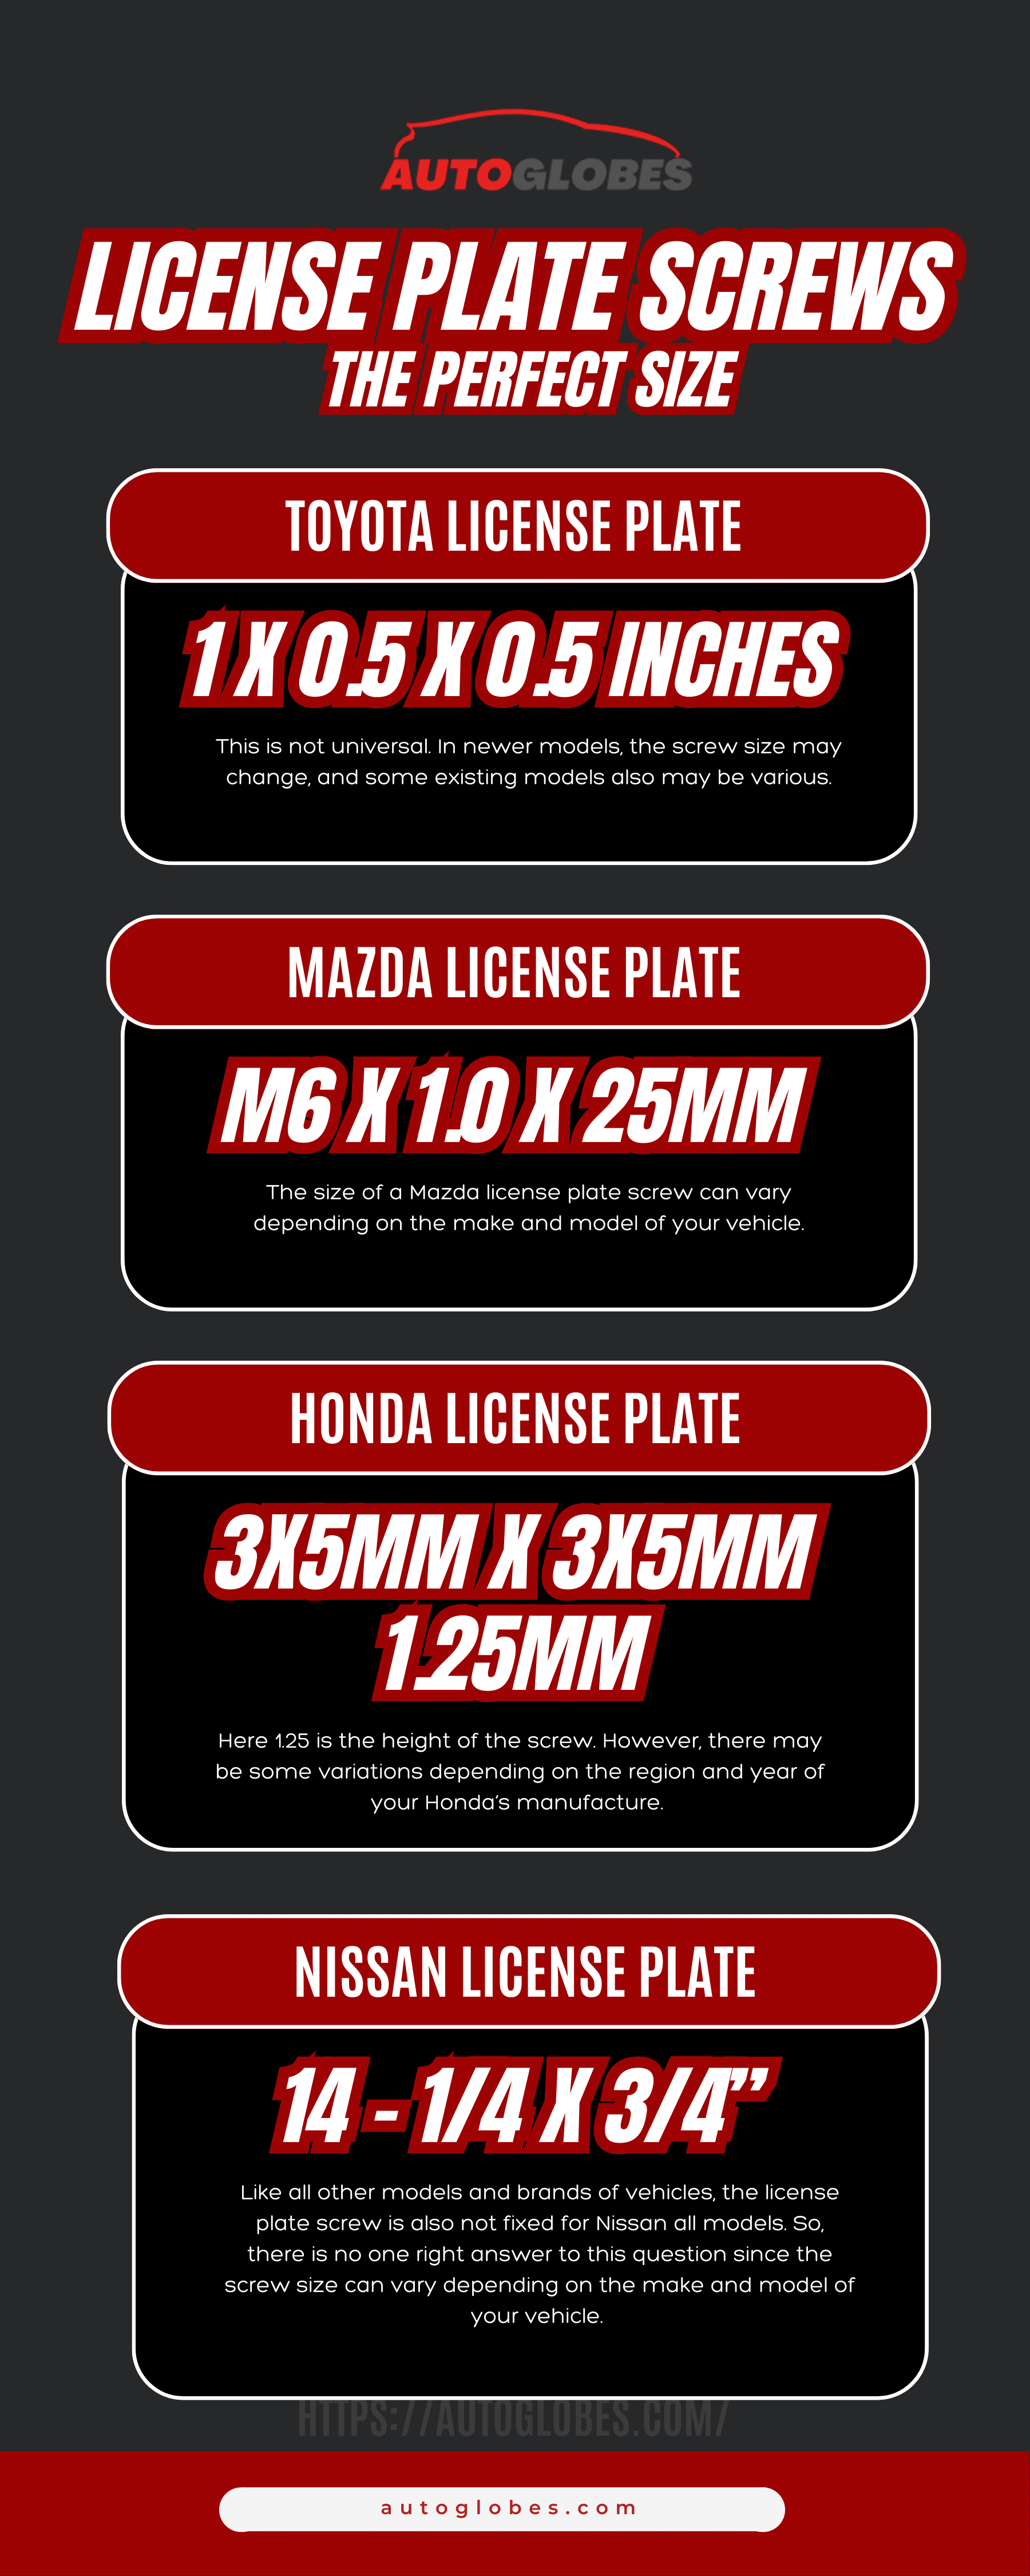 License Plate Screws - The Perfect Size Infographic